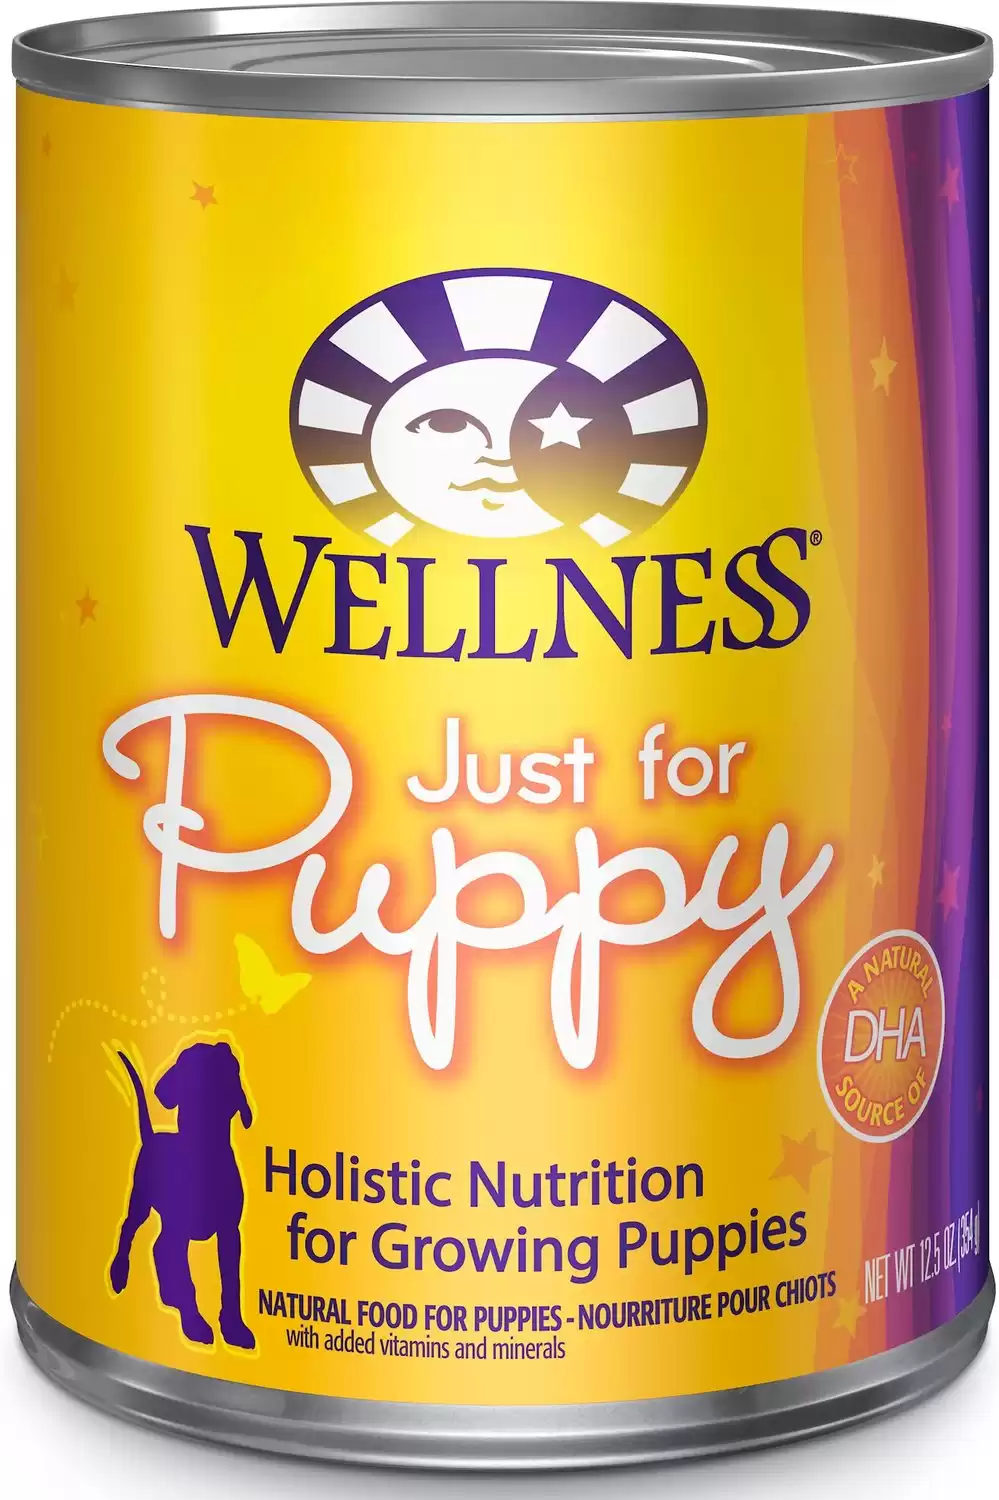 Wellness Complete Health Puppy Canned Dog Food